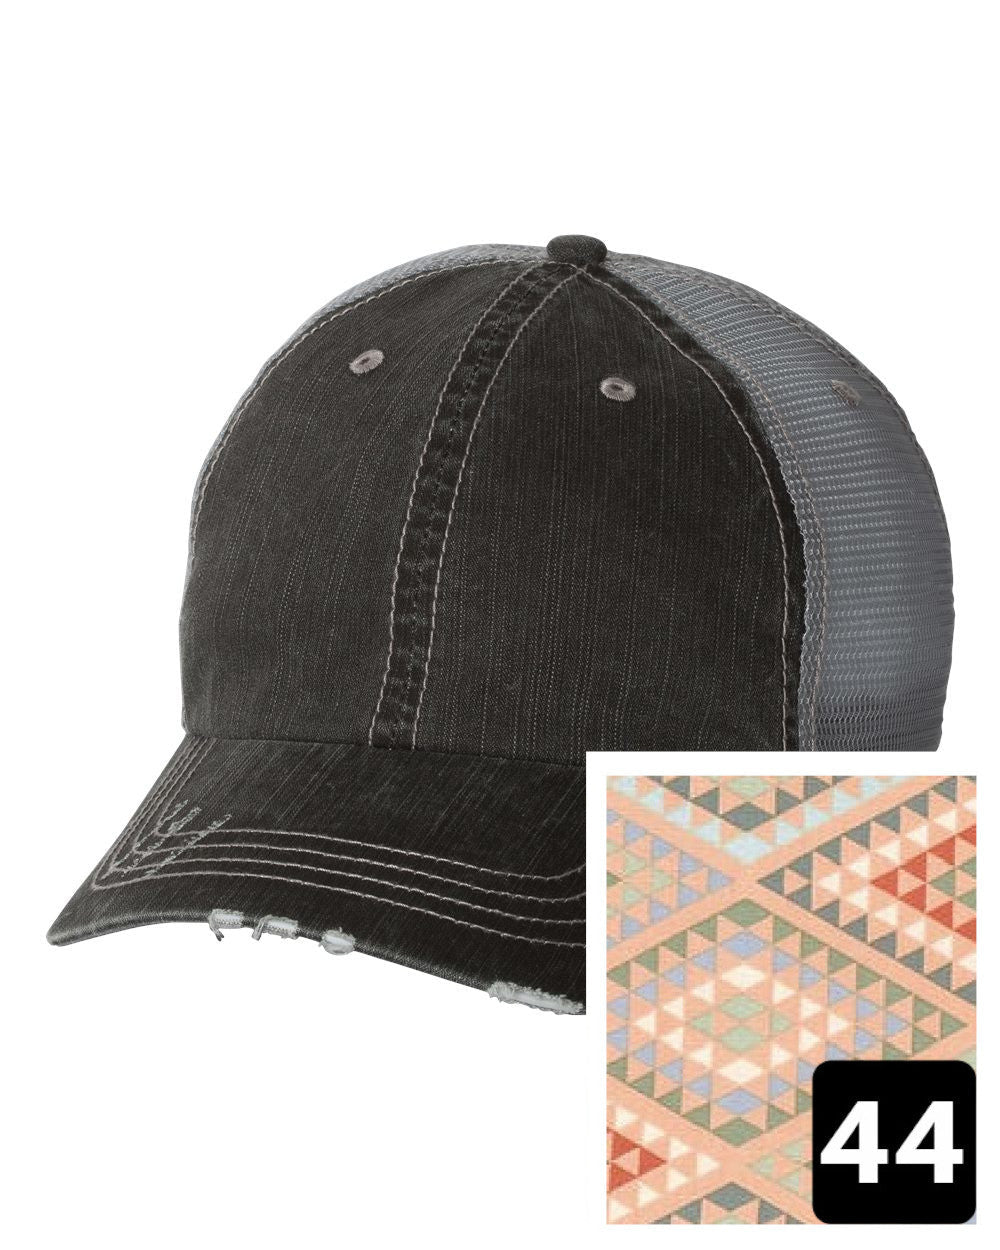 gray distressed trucker hat with navy coral and white chevron fabric state of Kentucky